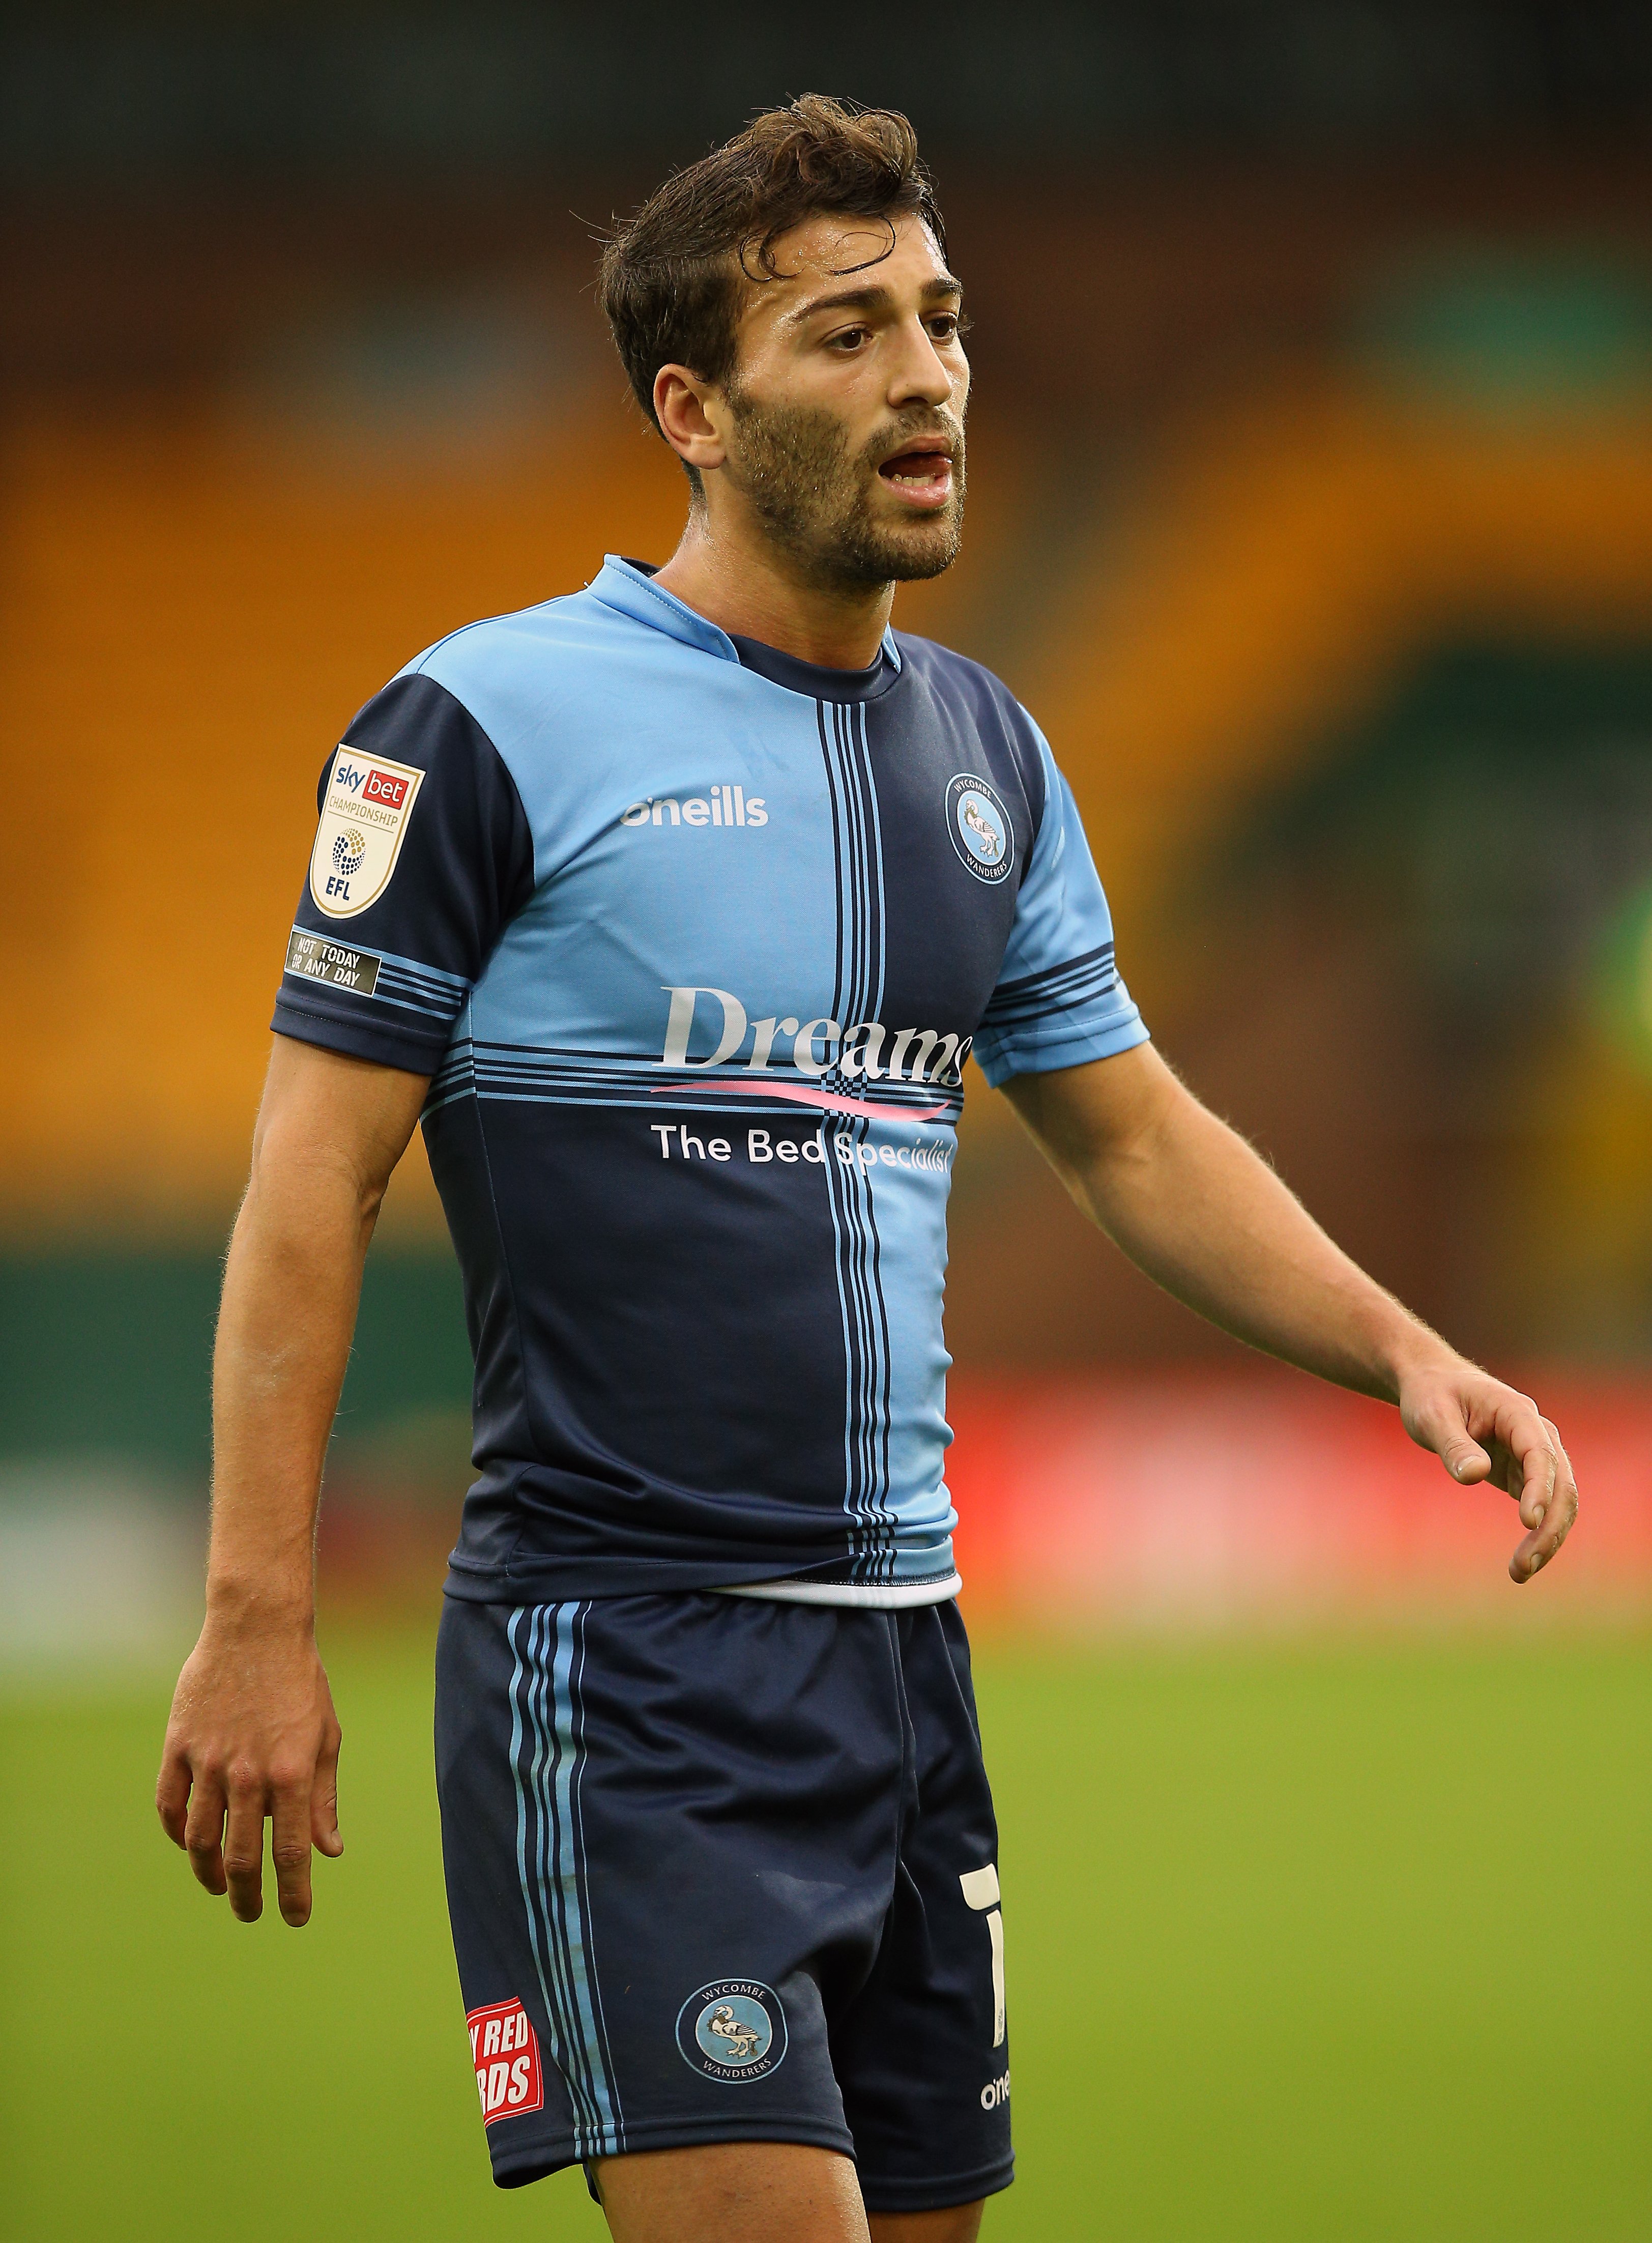 Wycombe wait on duo ahead of Royals visit | NewsChain